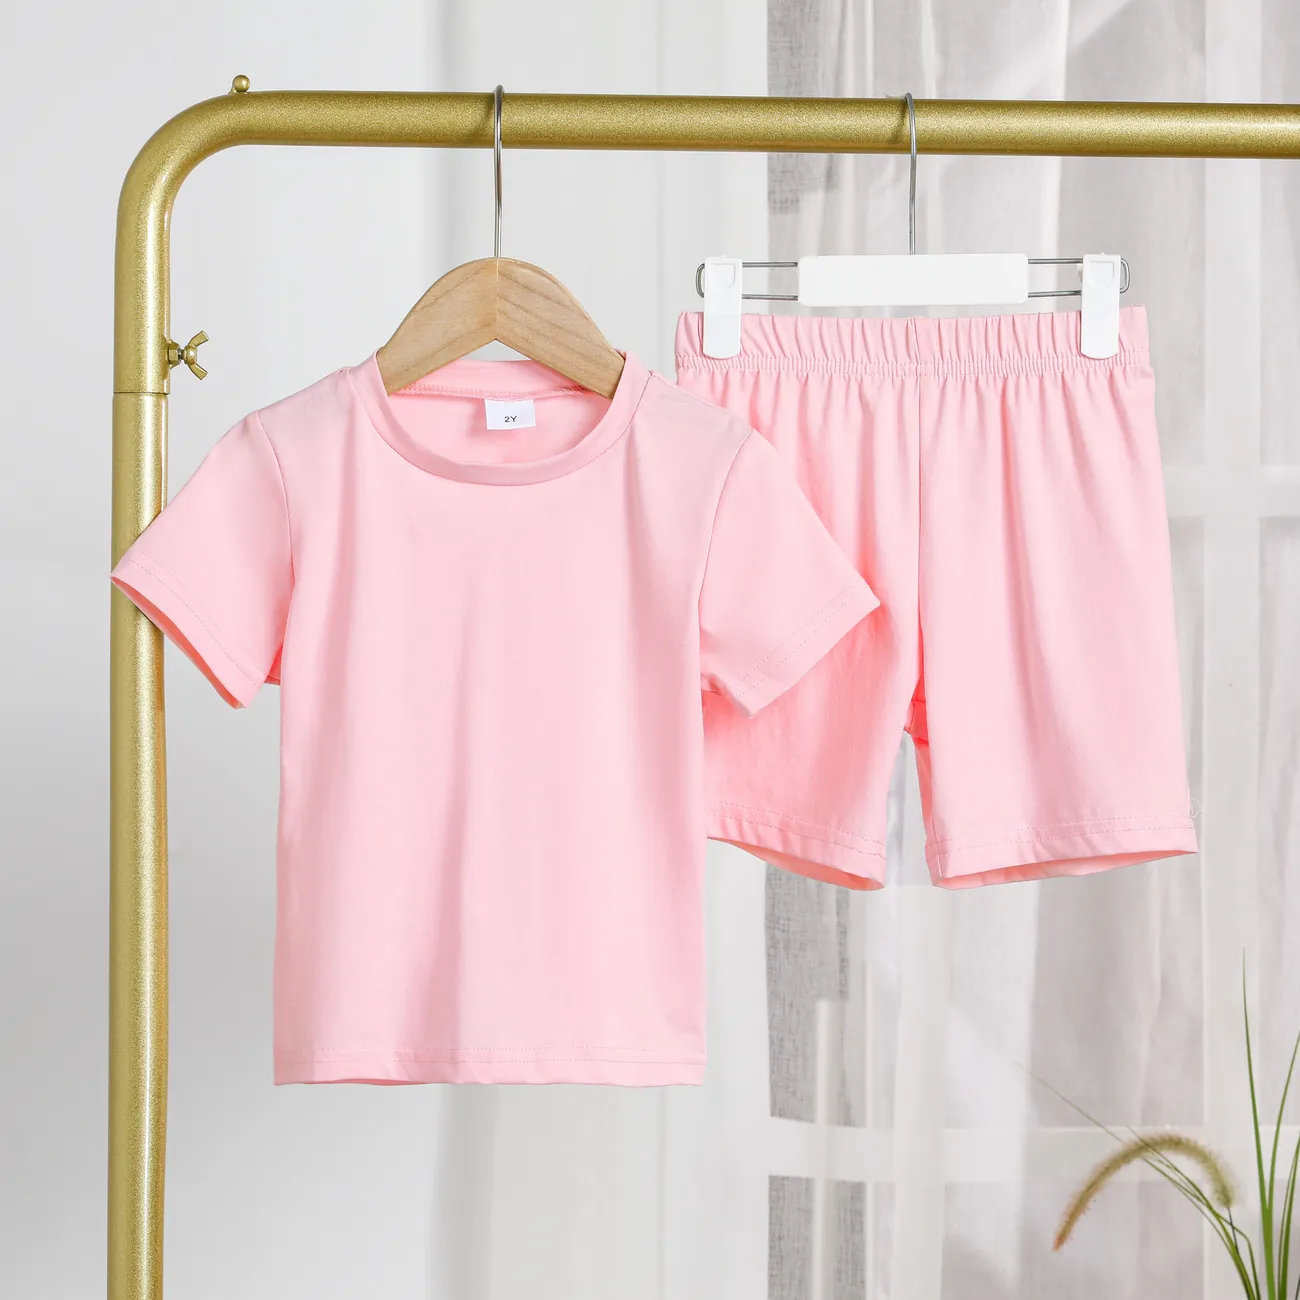 Toddler Boy/Girl 2pcs Cotton Solid Color Tee and Shorts Set Pink big image 1